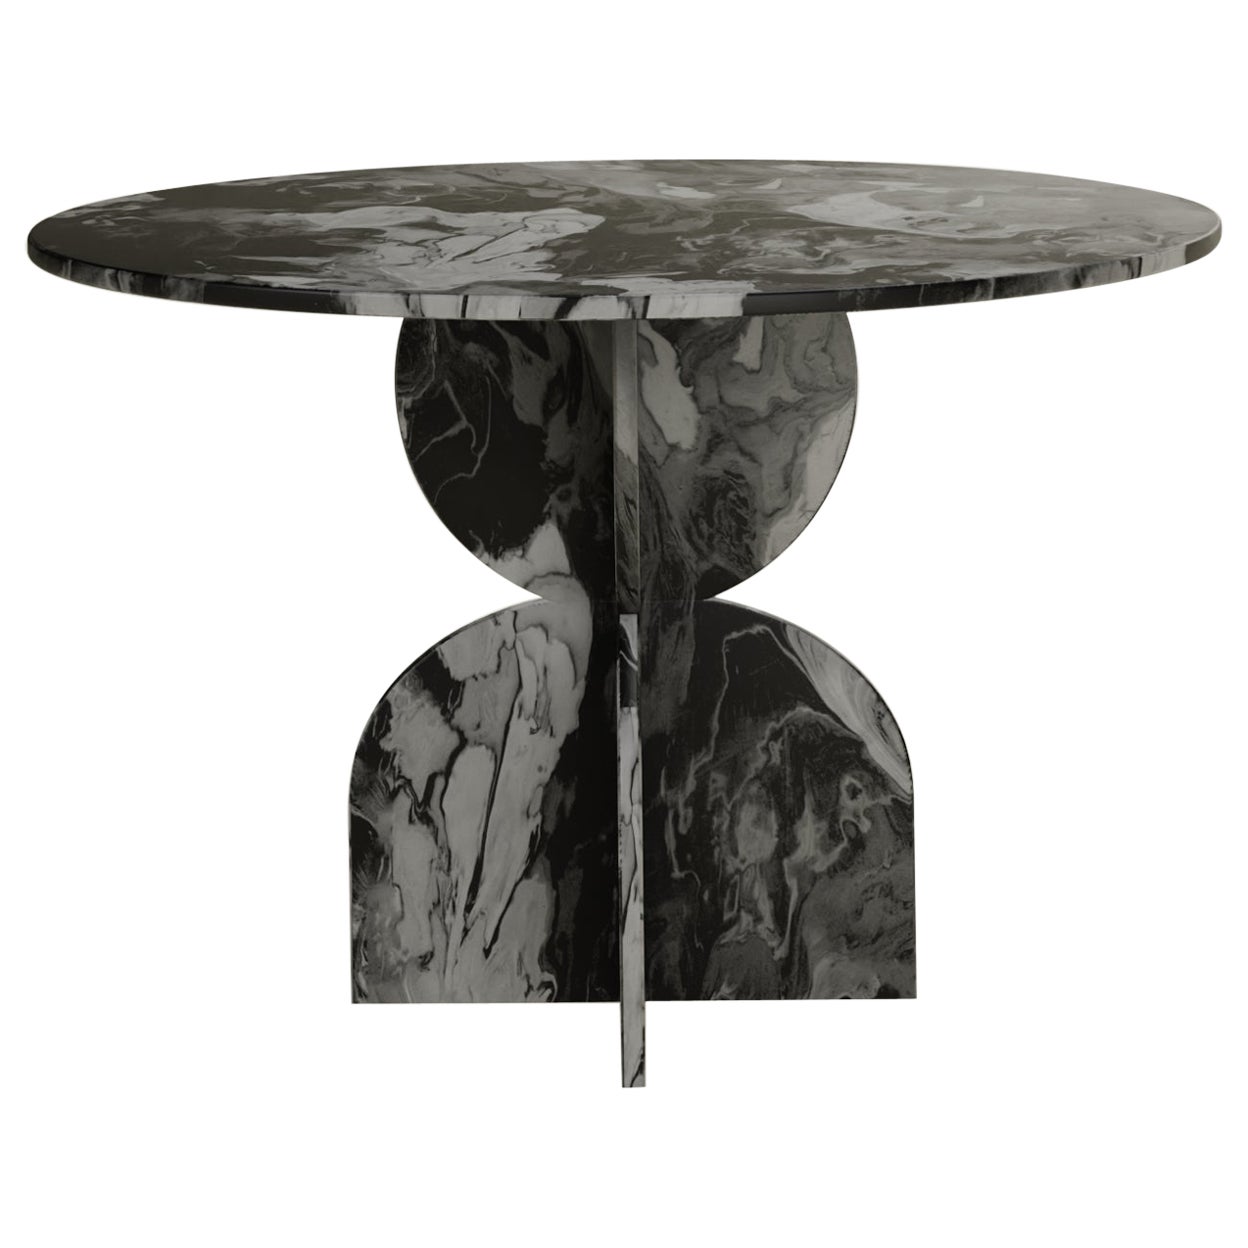 Contemporary Black Round Table Handcrafted 100% Recycled Plastic by Anqa Studios For Sale